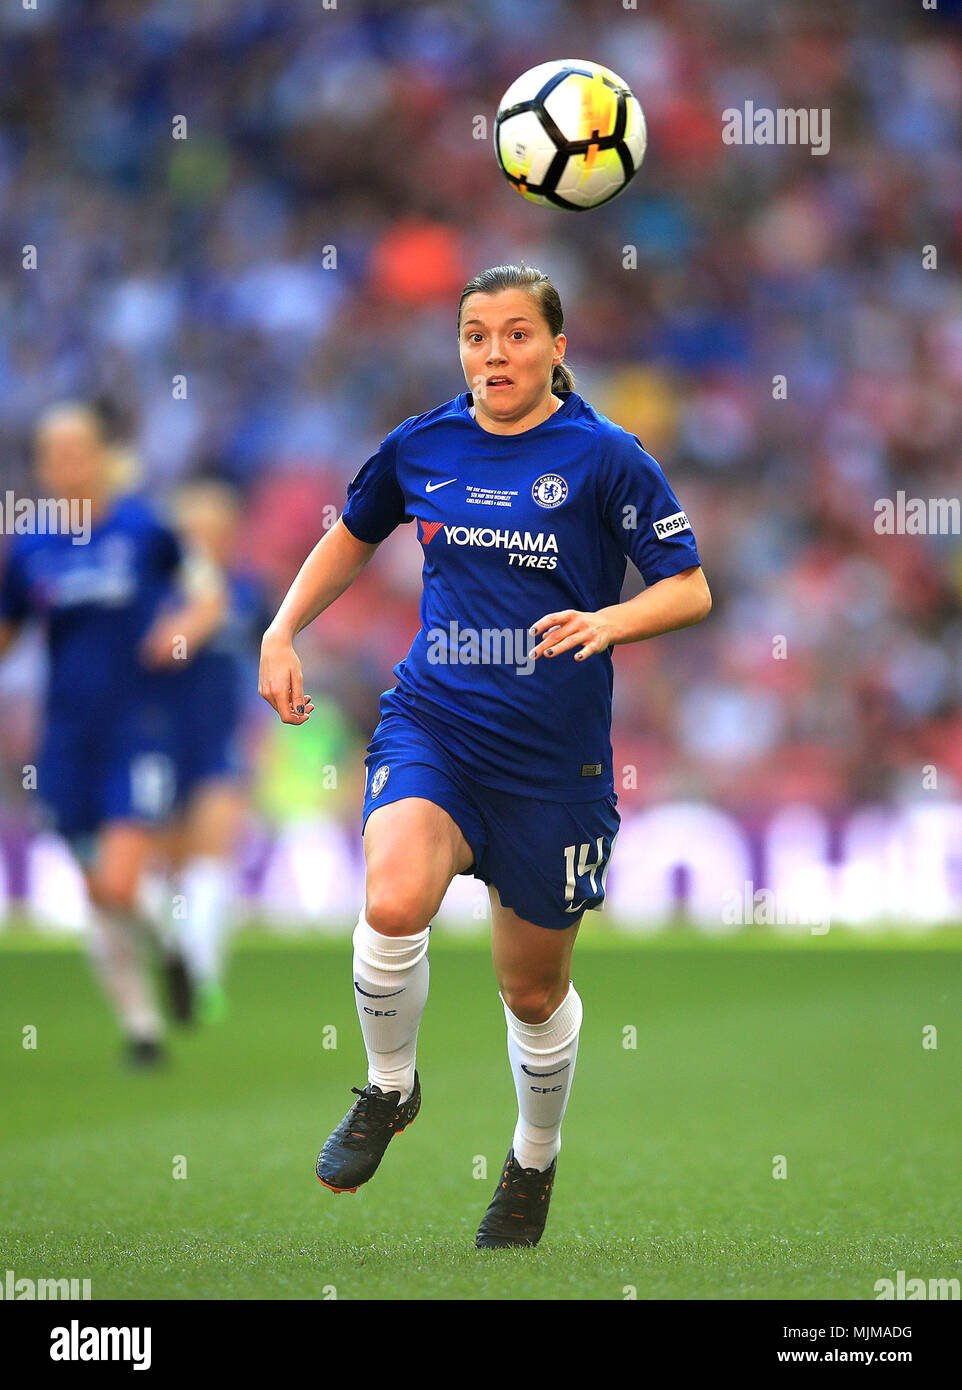 Chelsea Ladies' Fran Kirby during the SSE Women's FA Cup Final at Wembley Stadium, London. PRESS ASSOCIATION Photo. Picture date: Saturday May 5, 2018. See PA story SOCCER Women Final. Photo credit should read: Adam Davy/PA Wire. RESTRICTIONS: No use with unauthorised audio, video, data, fixture lists, club/league logos or 'live' services. Online in-match use limited to 75 images, no video emulation. No use in betting, games or single club/league/player publications. Stock Photo